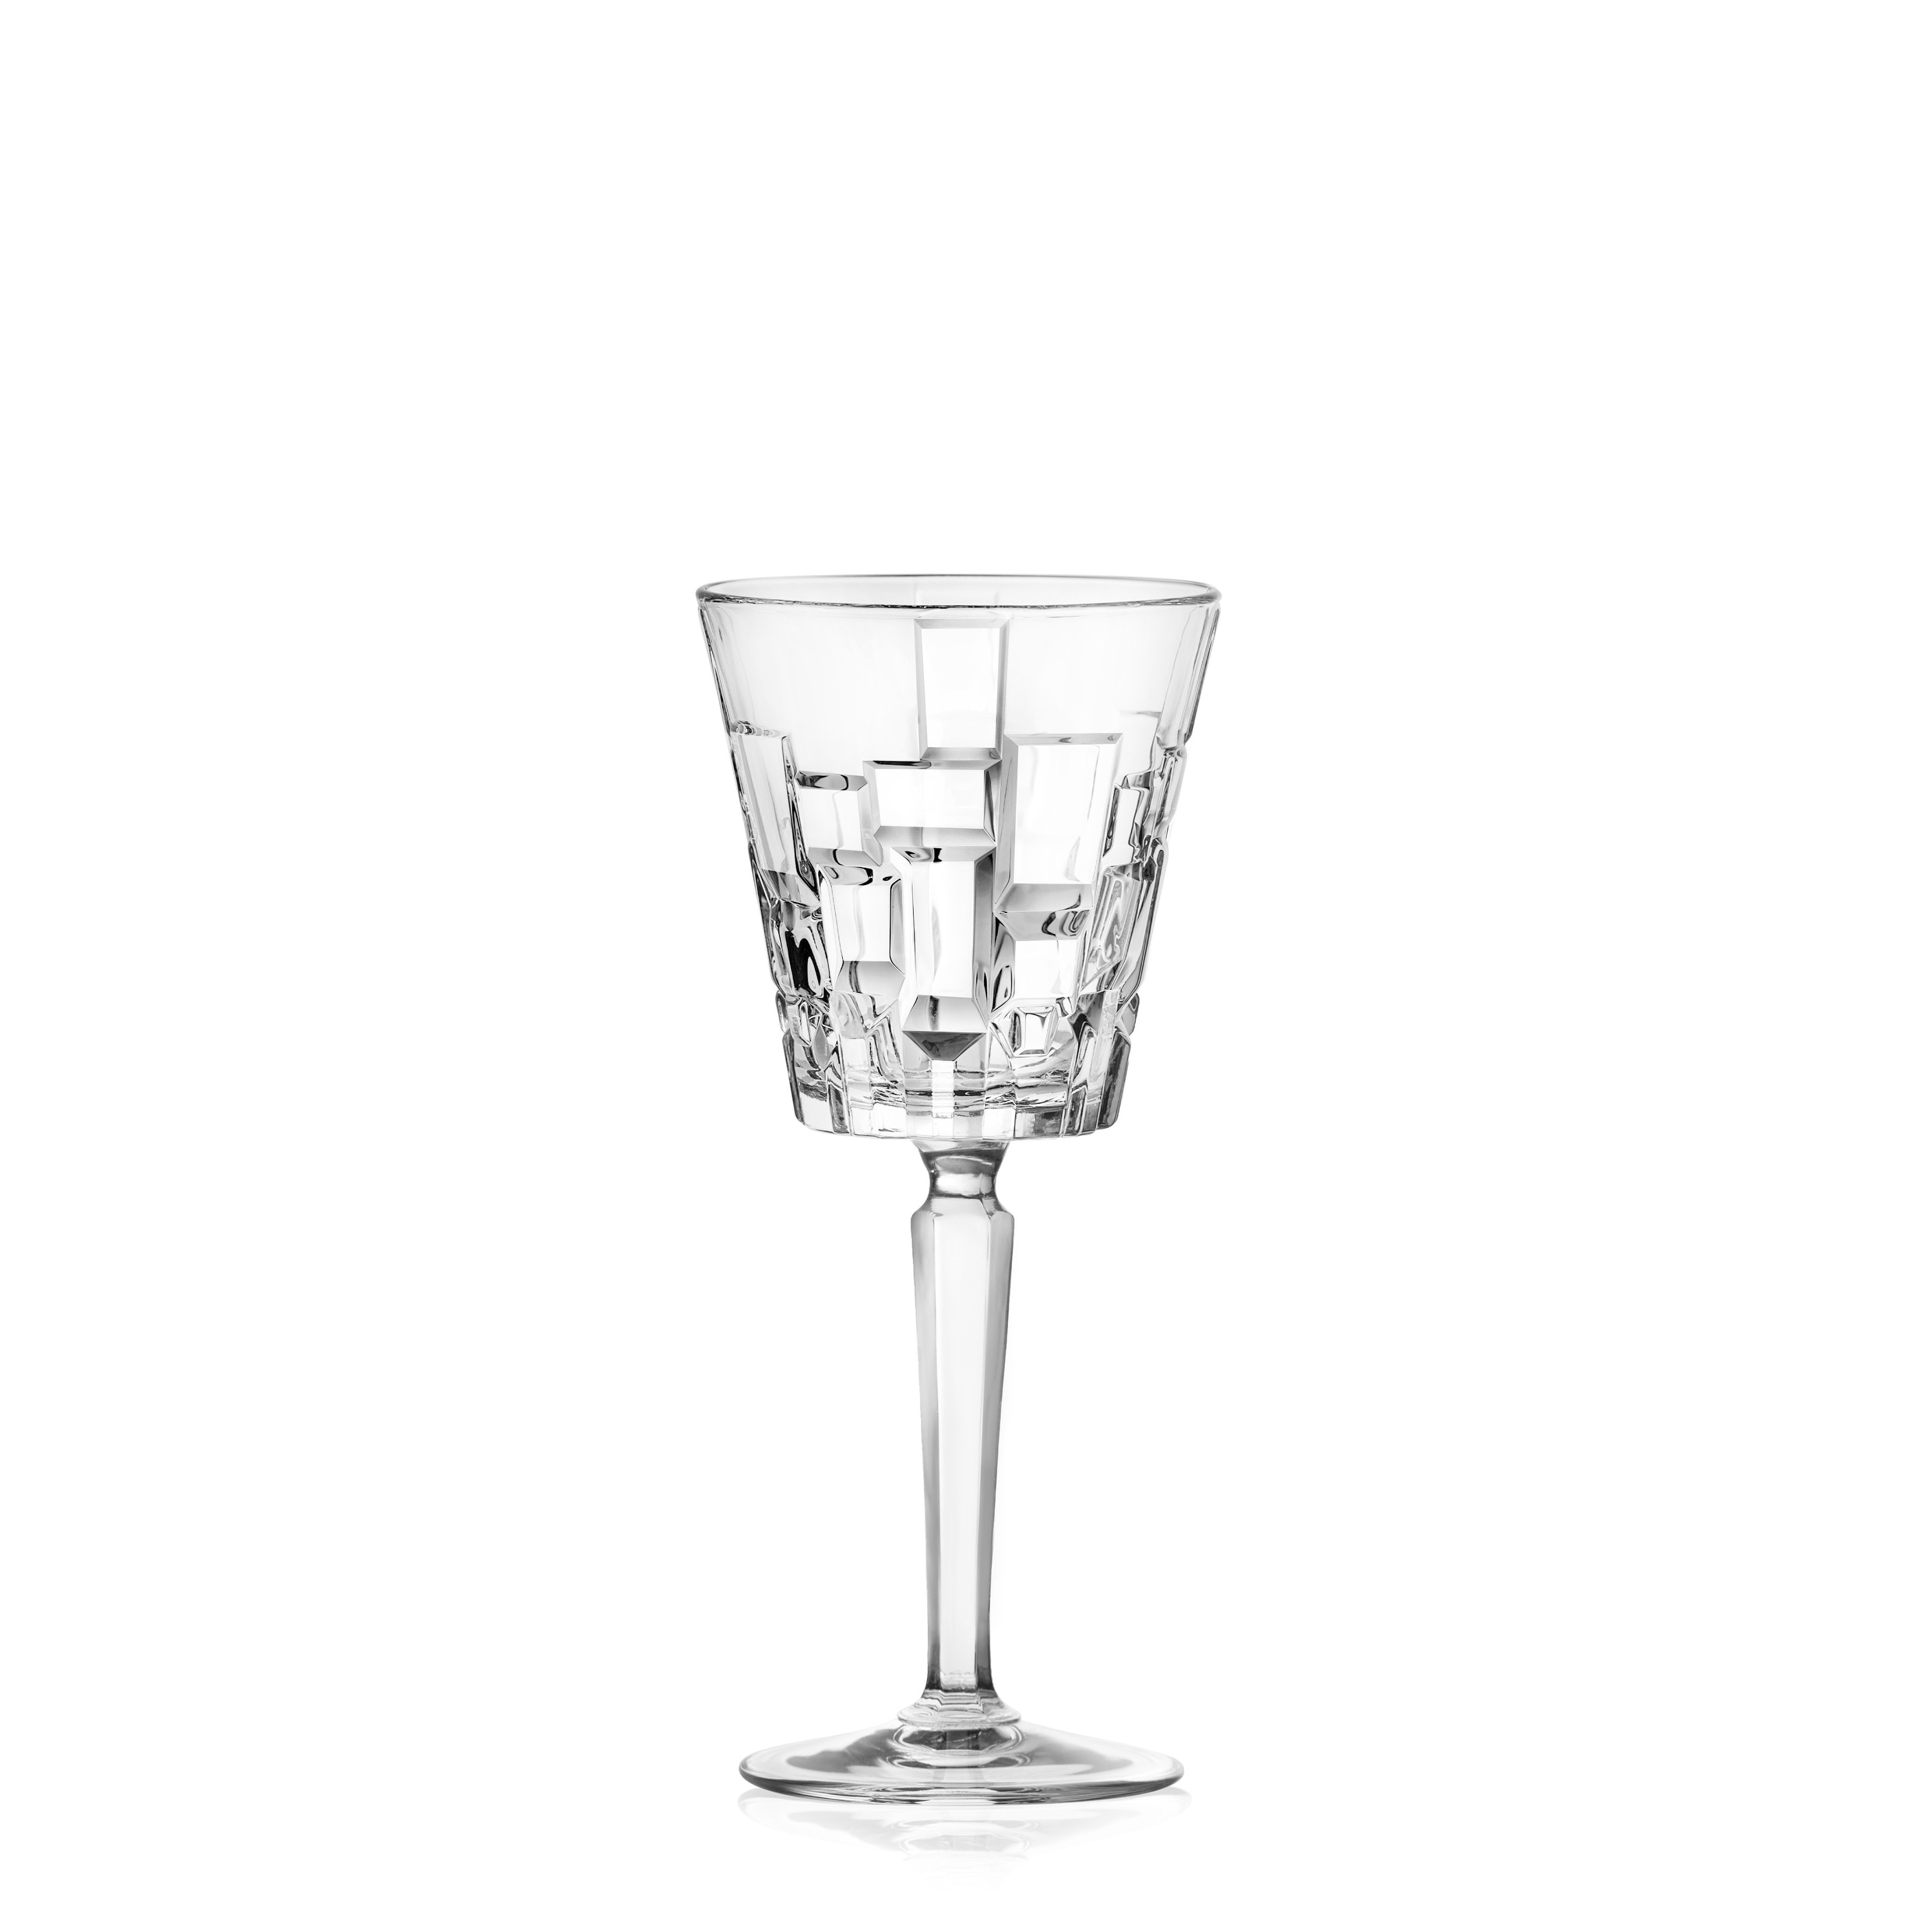 https://ak1.ostkcdn.com/images/products/is/images/direct/07a7249bd6d6e7ee4c63aeefcc386879dea4d4f1/Majestic-Gifts-Inc-Crystal-like-Glass-Wine-Water-Goblet-6.8oz.-Set-6.jpg